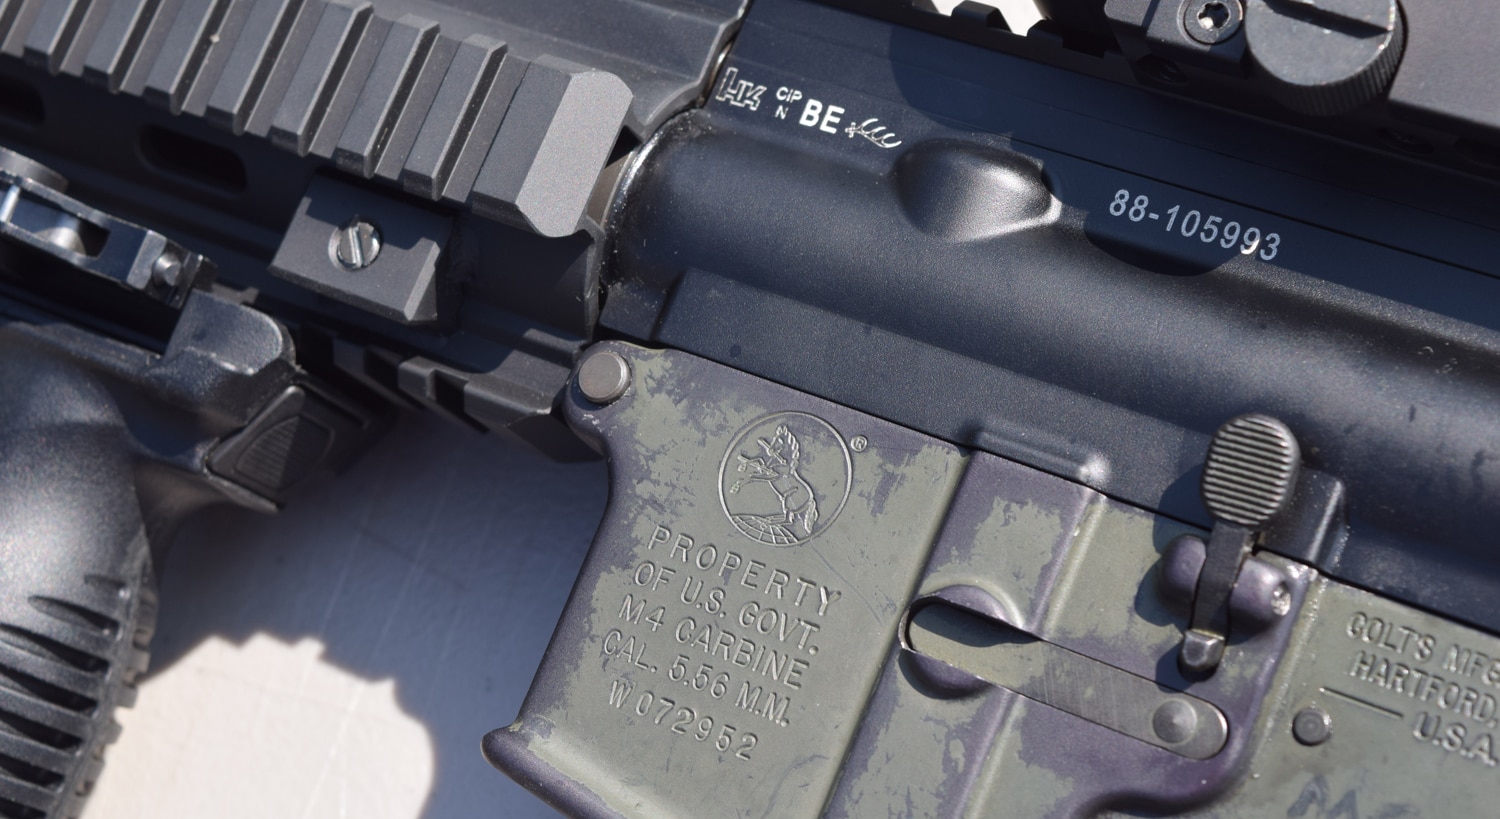 Each ATF SRT agent carries a franken-gun. Their carbines are equipped with an HK416 upper capable of select-fire options and a Colt lower receiver. (Photo: Daniel Terrill/Guns.com)